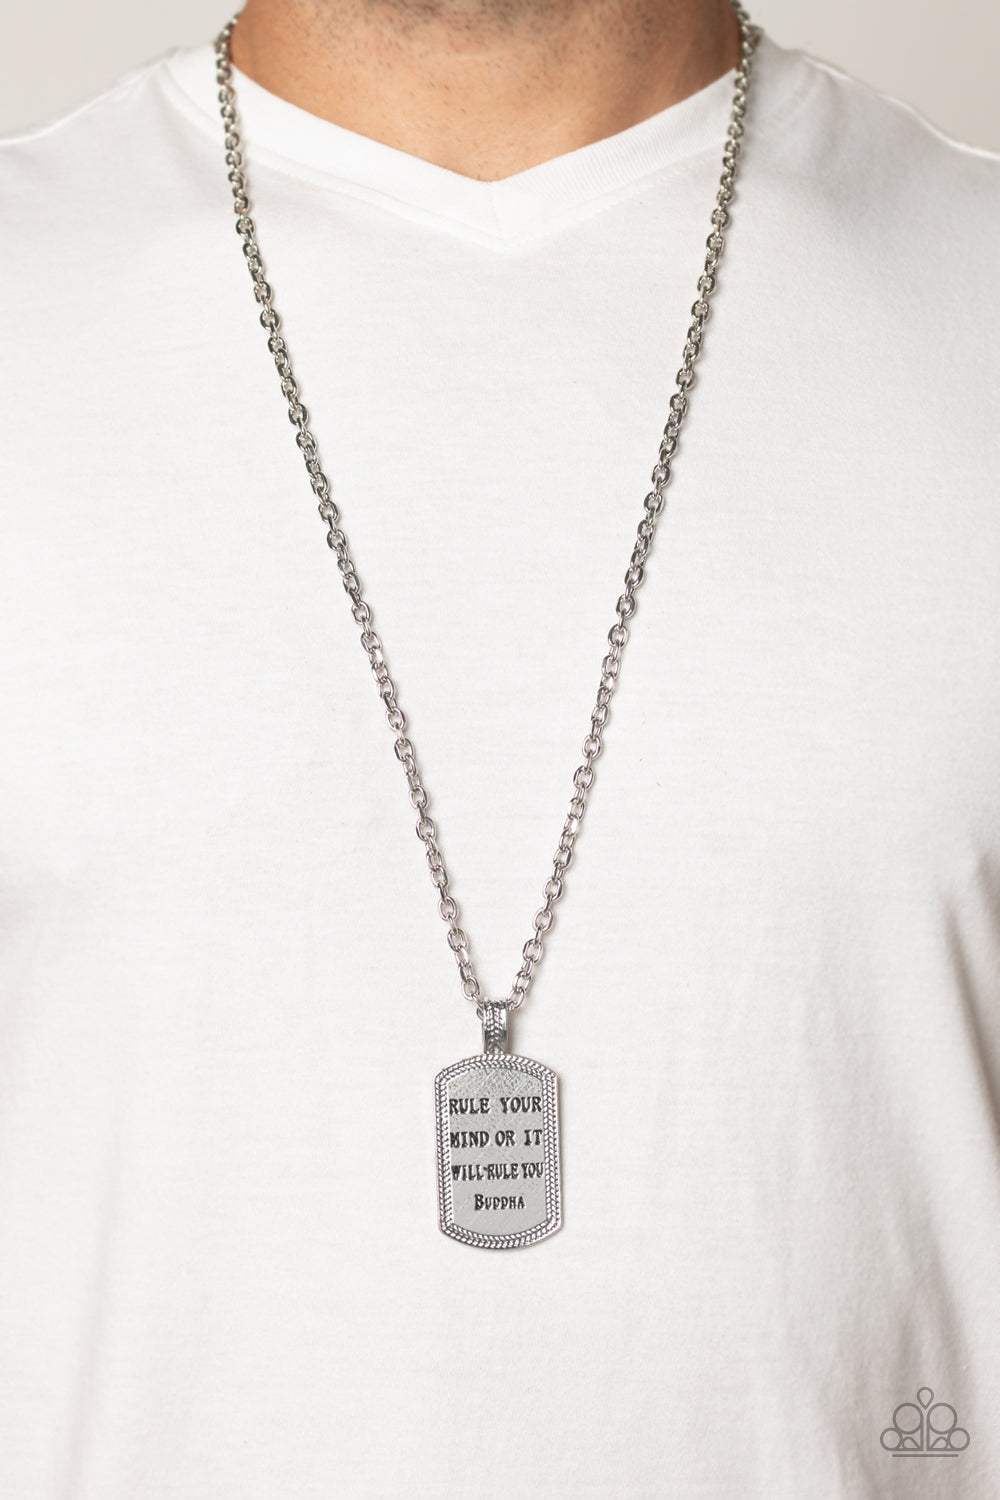 Empire State of Mind - silver - Paparazzi necklace